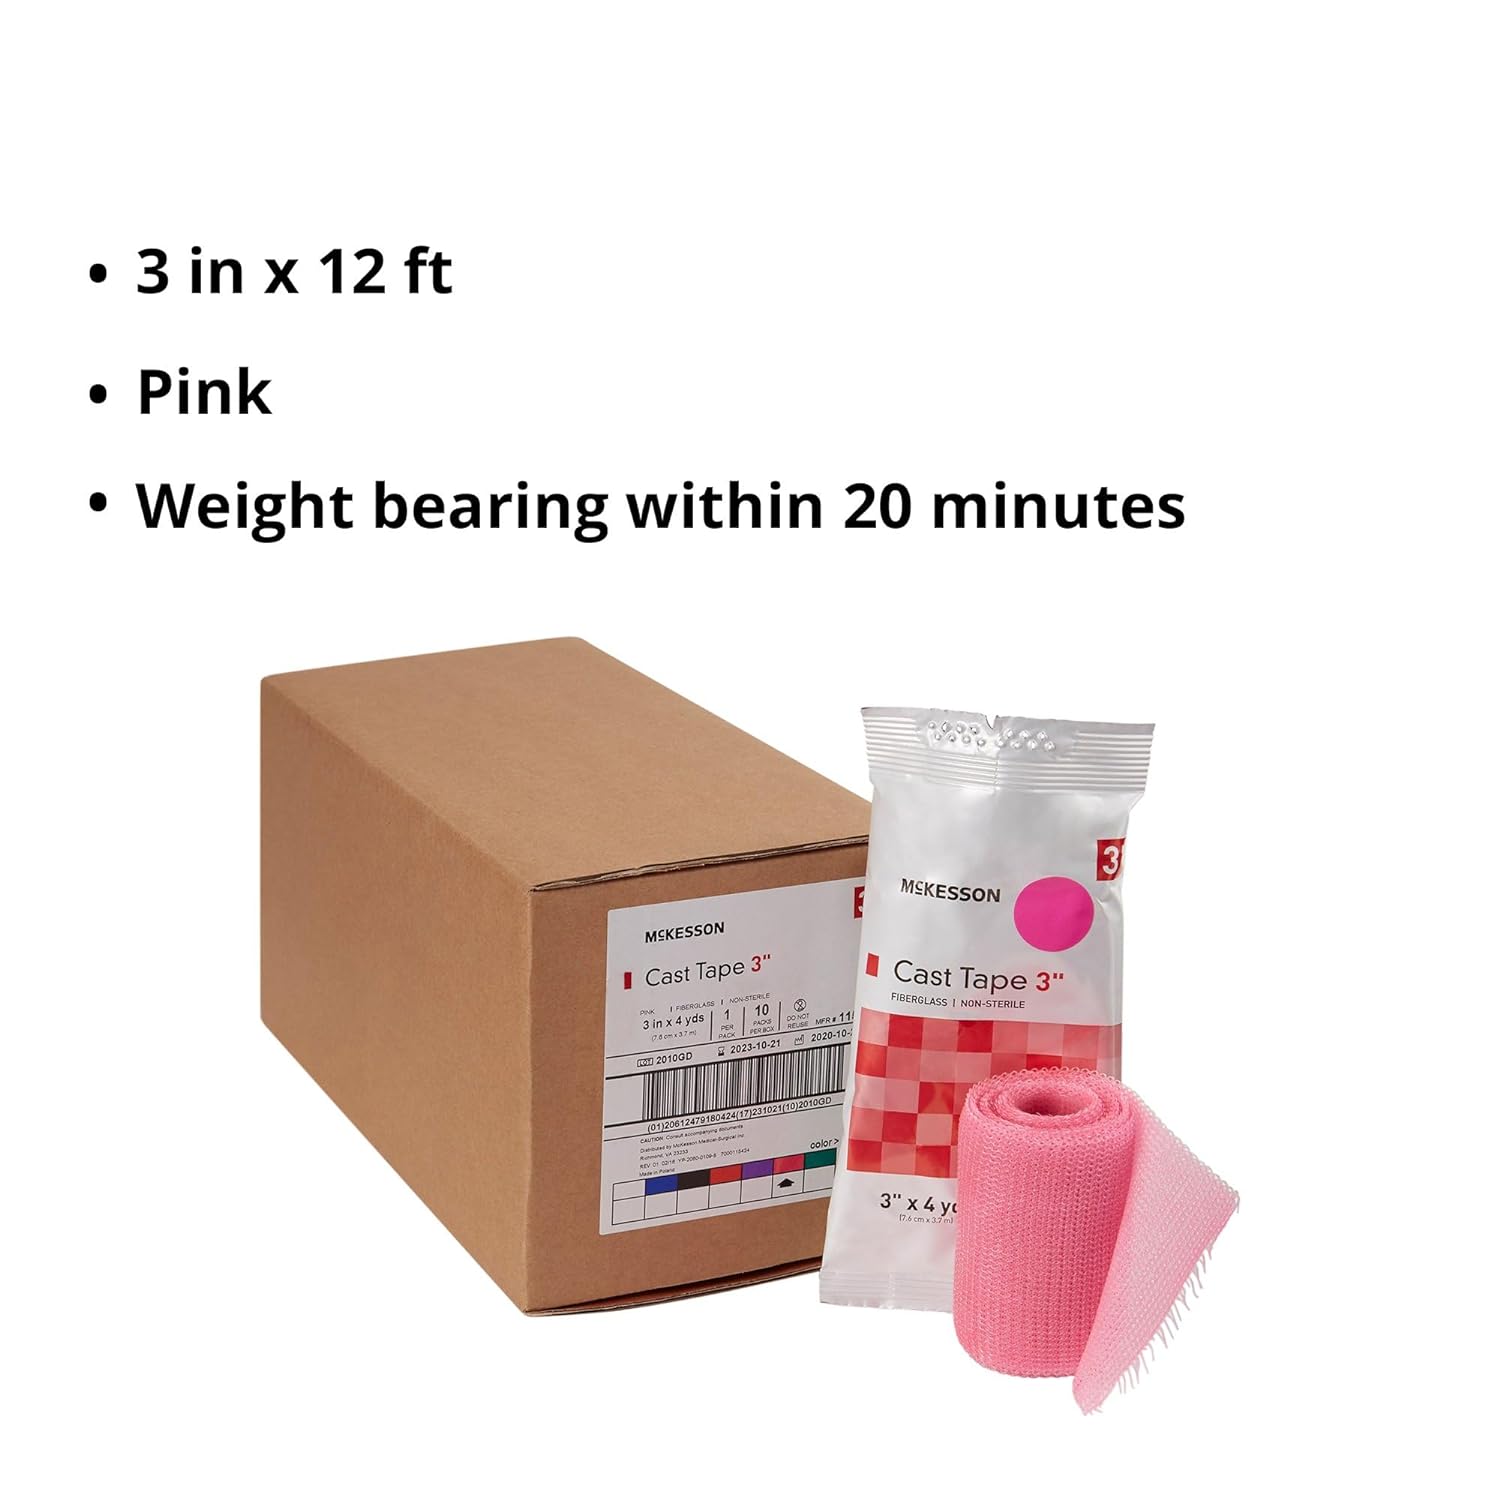 McKesson Cast Tape, Fiberglass, Pink, 3 in x 4 yds, 1 Count, 10 Packs, 10 Total : Health & Household